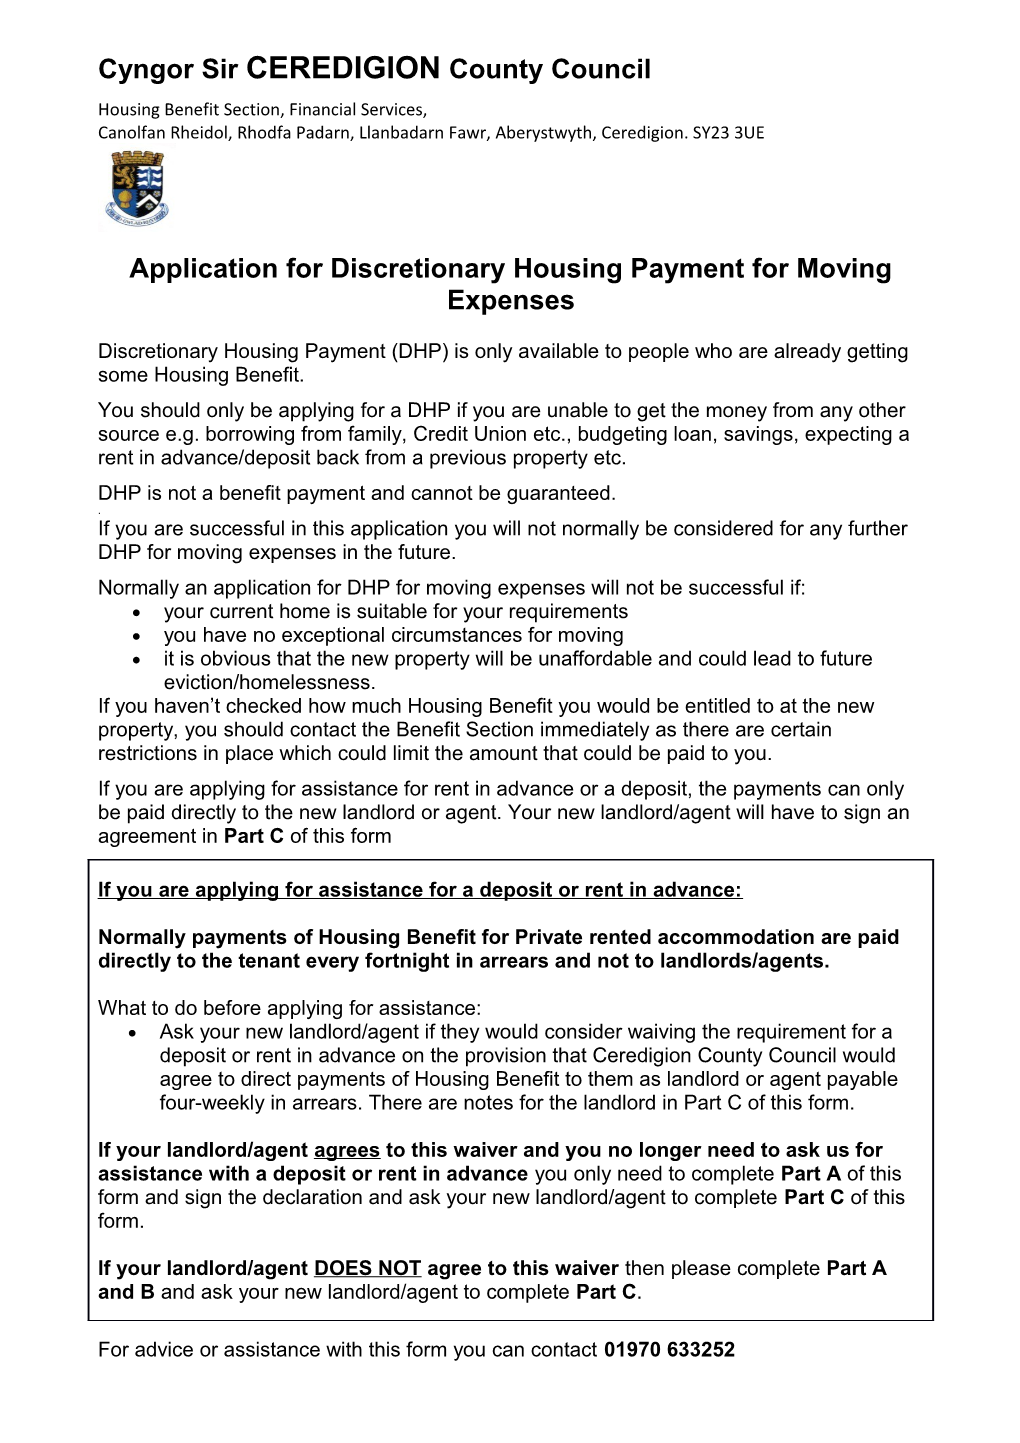 Application for Discretionary Housing Payment for Moving Expenses